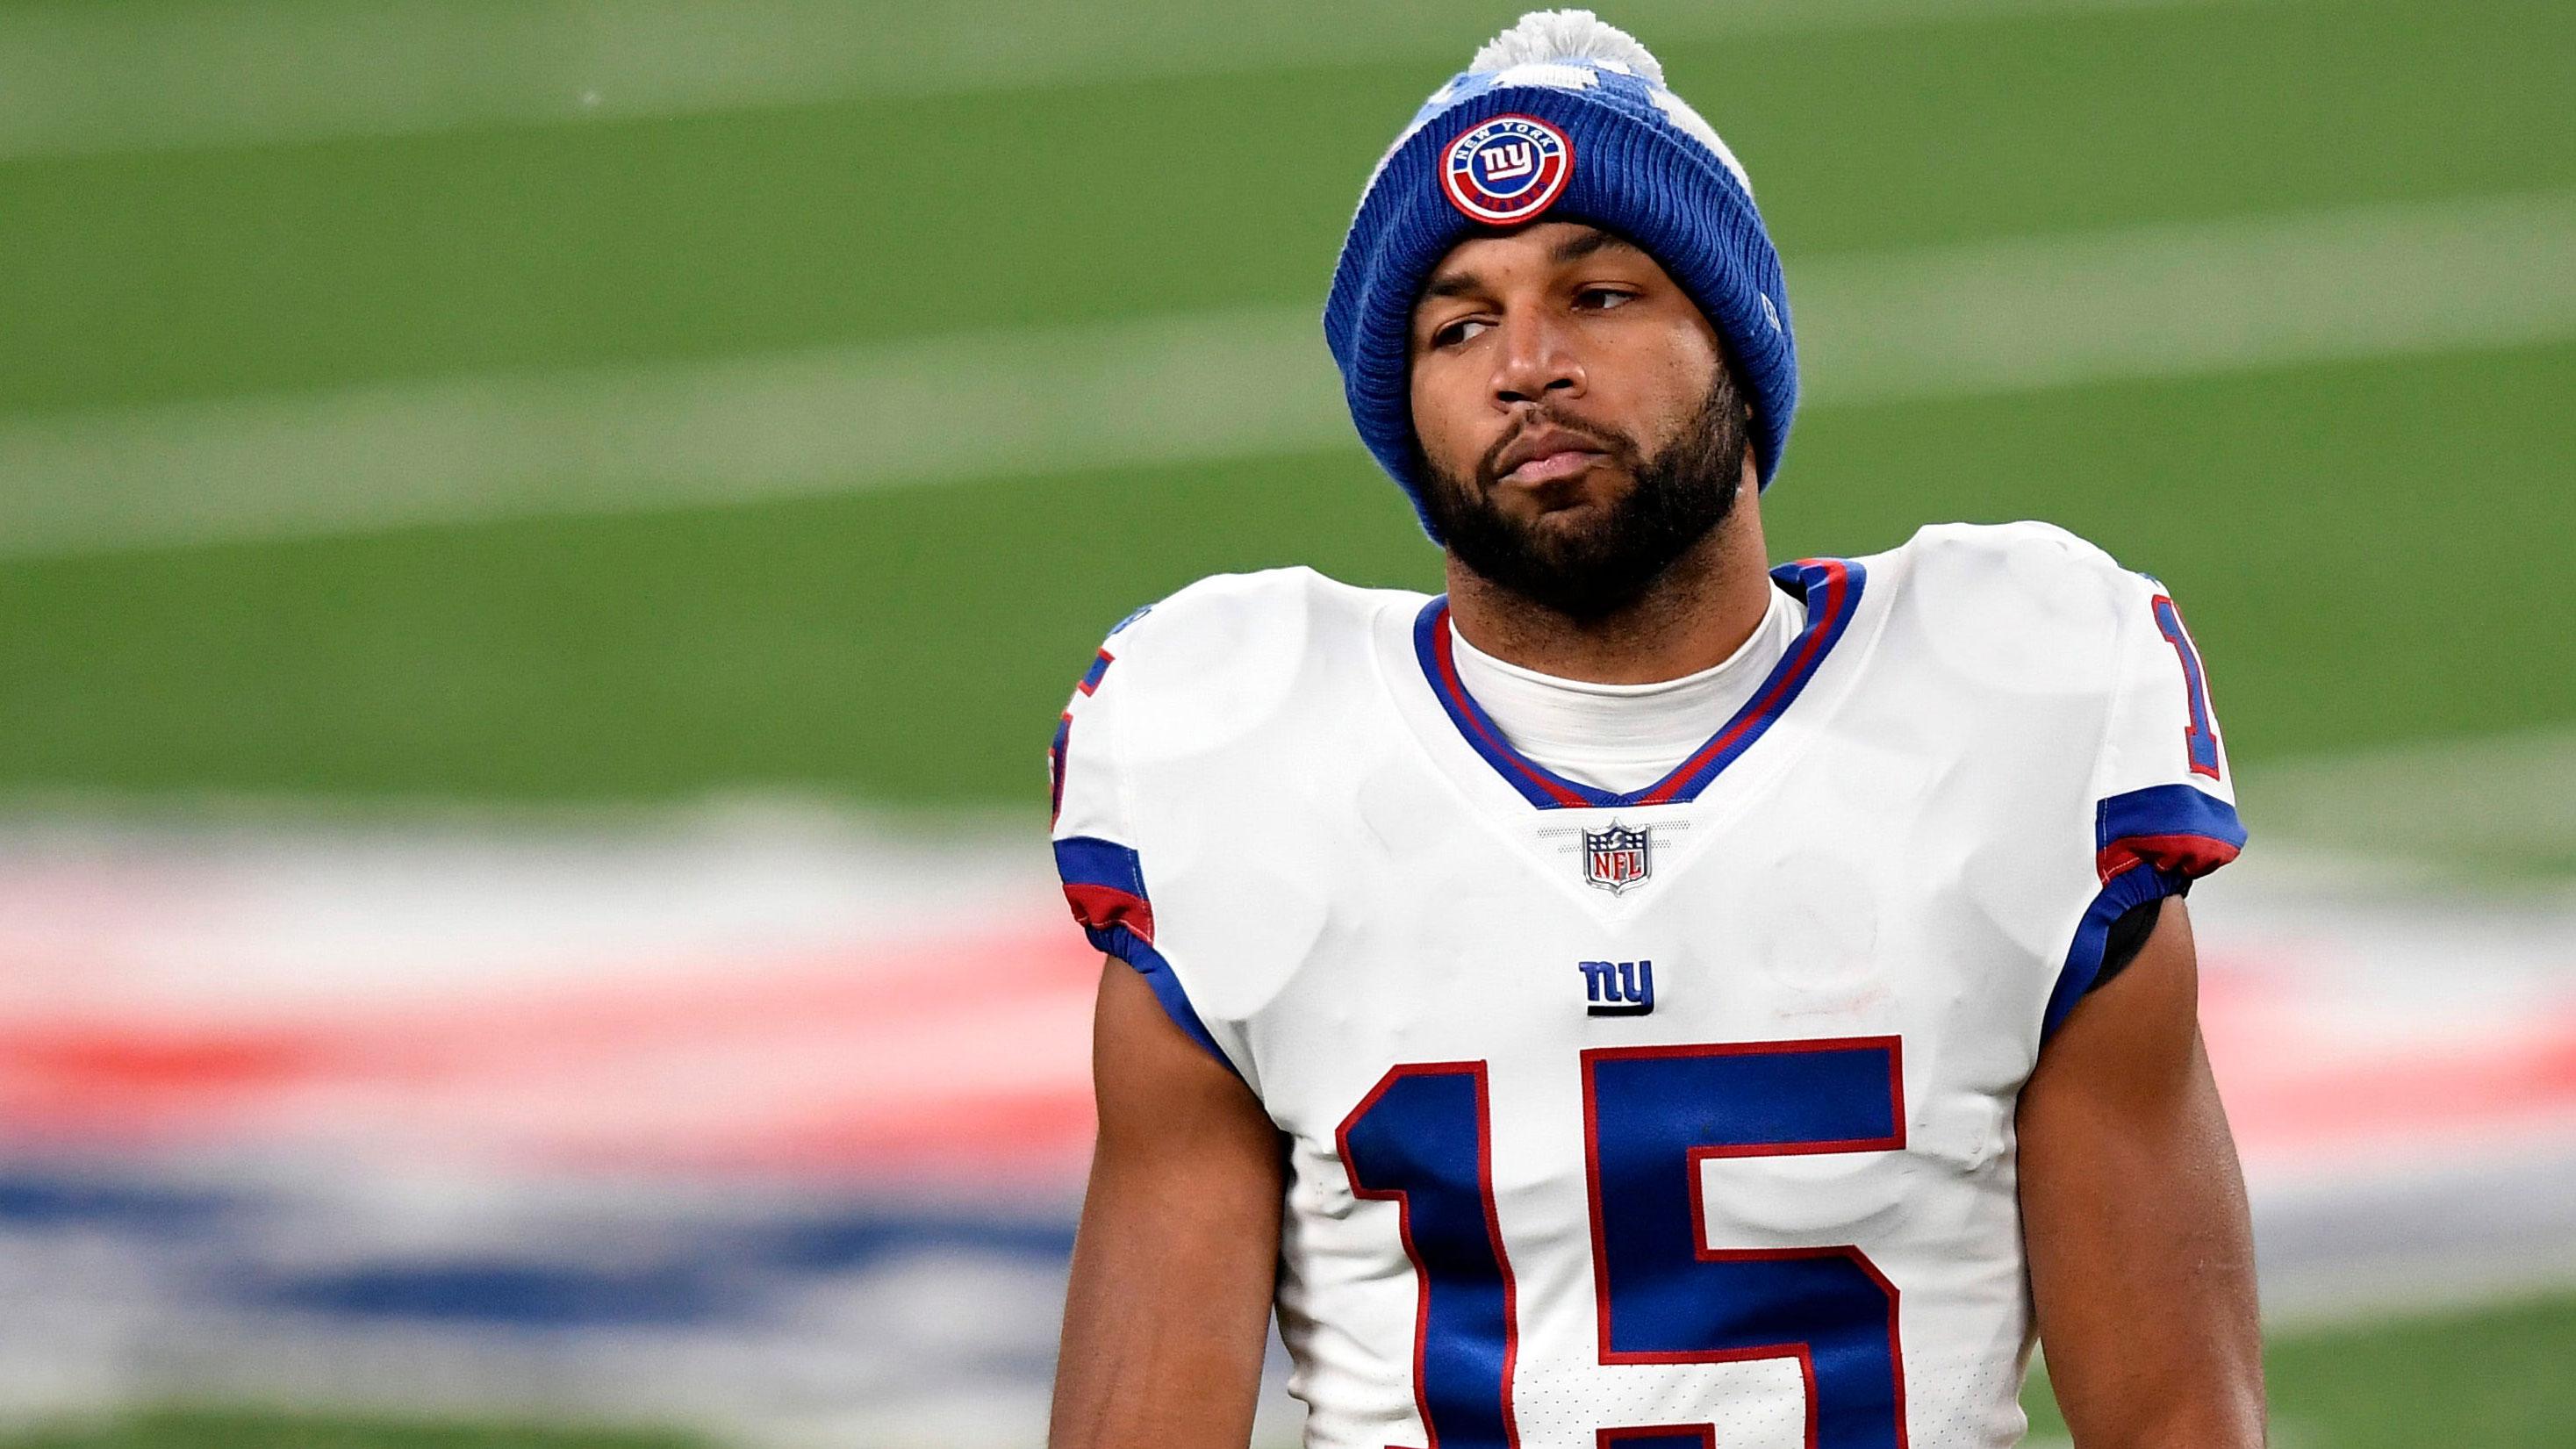 New York Giants wide receiver Golden Tate (15) walks off the field after a 25-23 loss to the Tampa Bay Buccaneers at MetLife Stadium on Monday, Nov. 2, 2020, in East Rutherford. / Danielle Parhizkaran/NorthJersey.com via Imagn Content Services, LLC